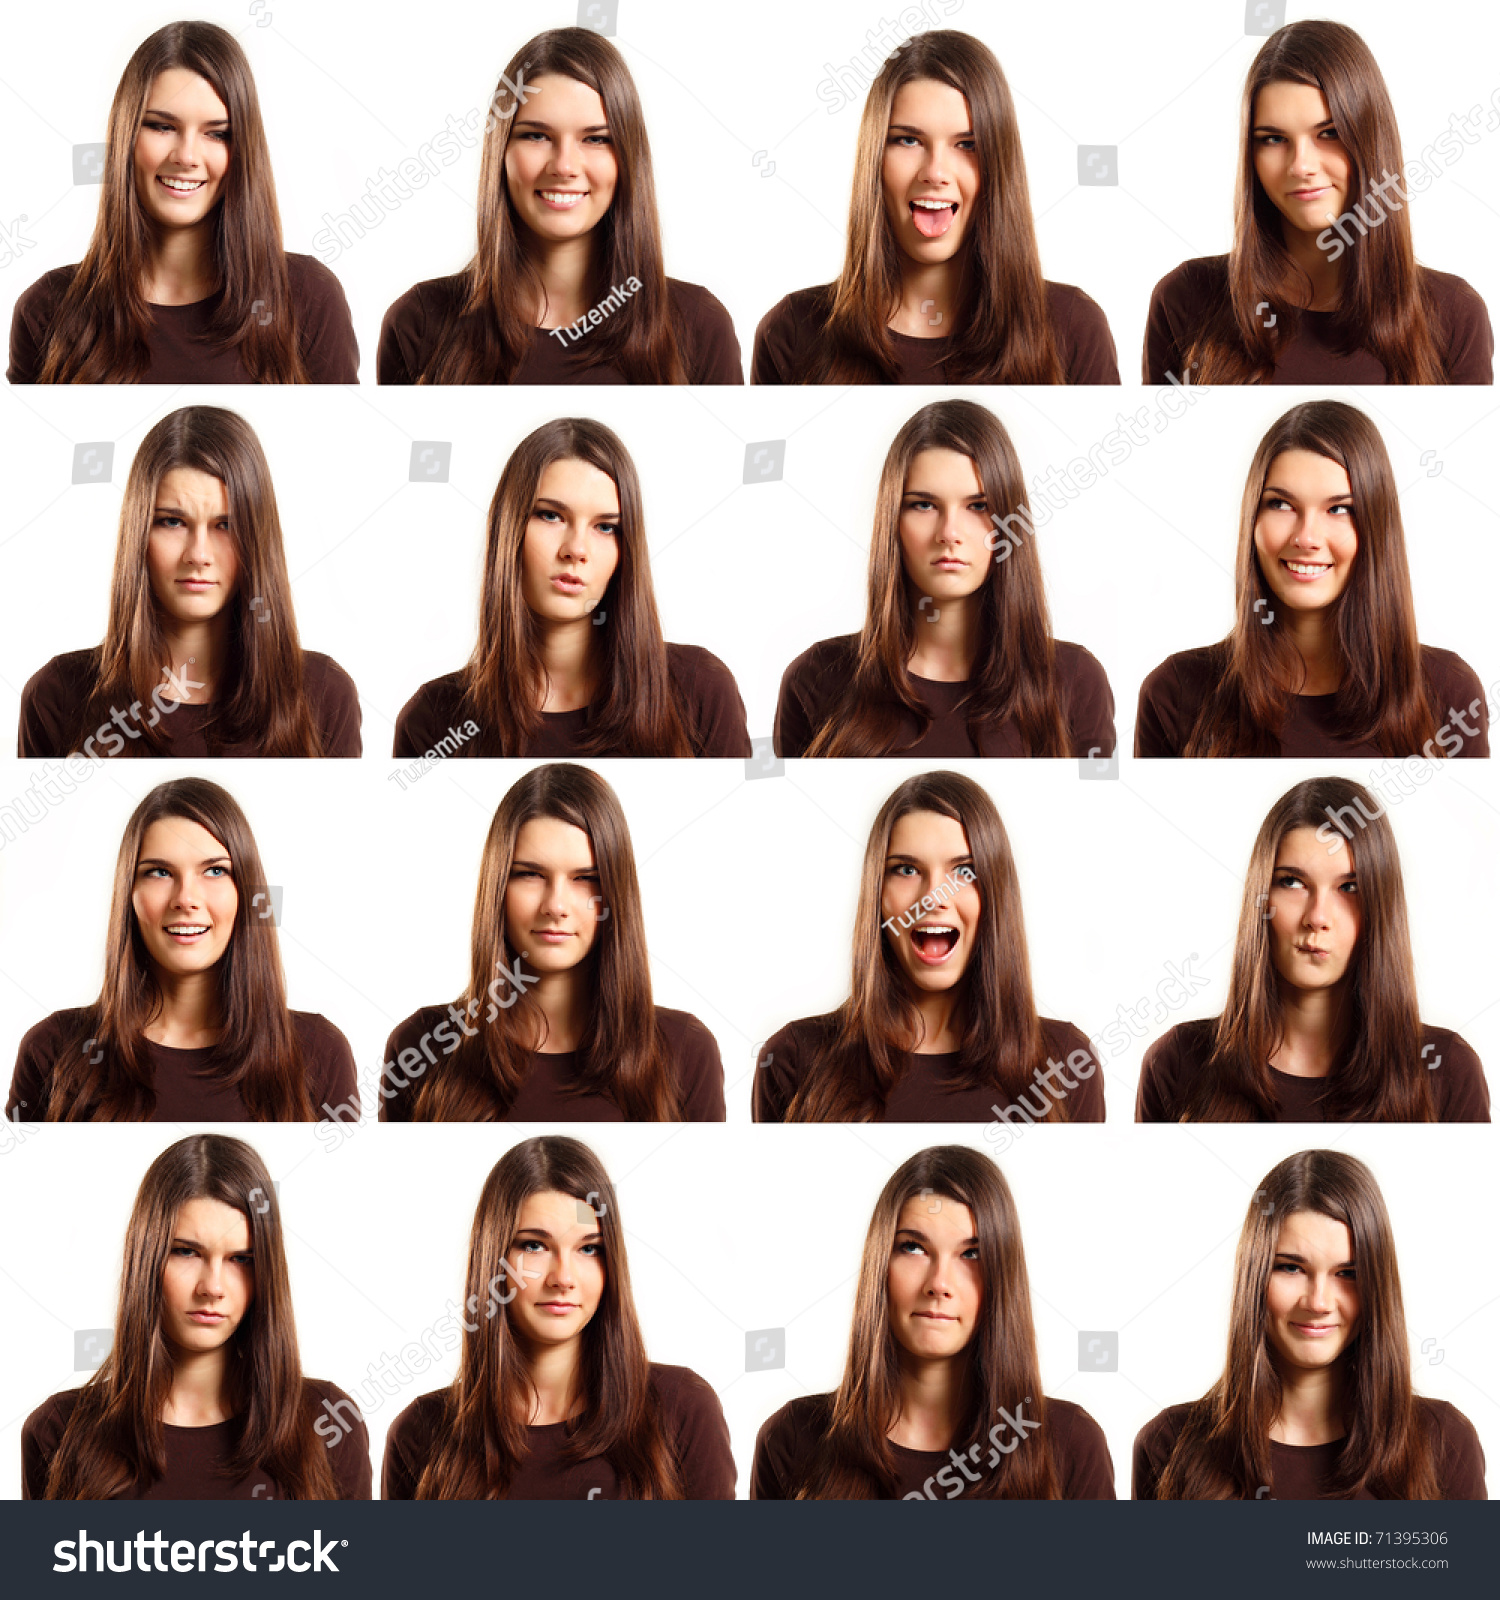 teenager girl with different facial expression face set isolated on white background #71395306